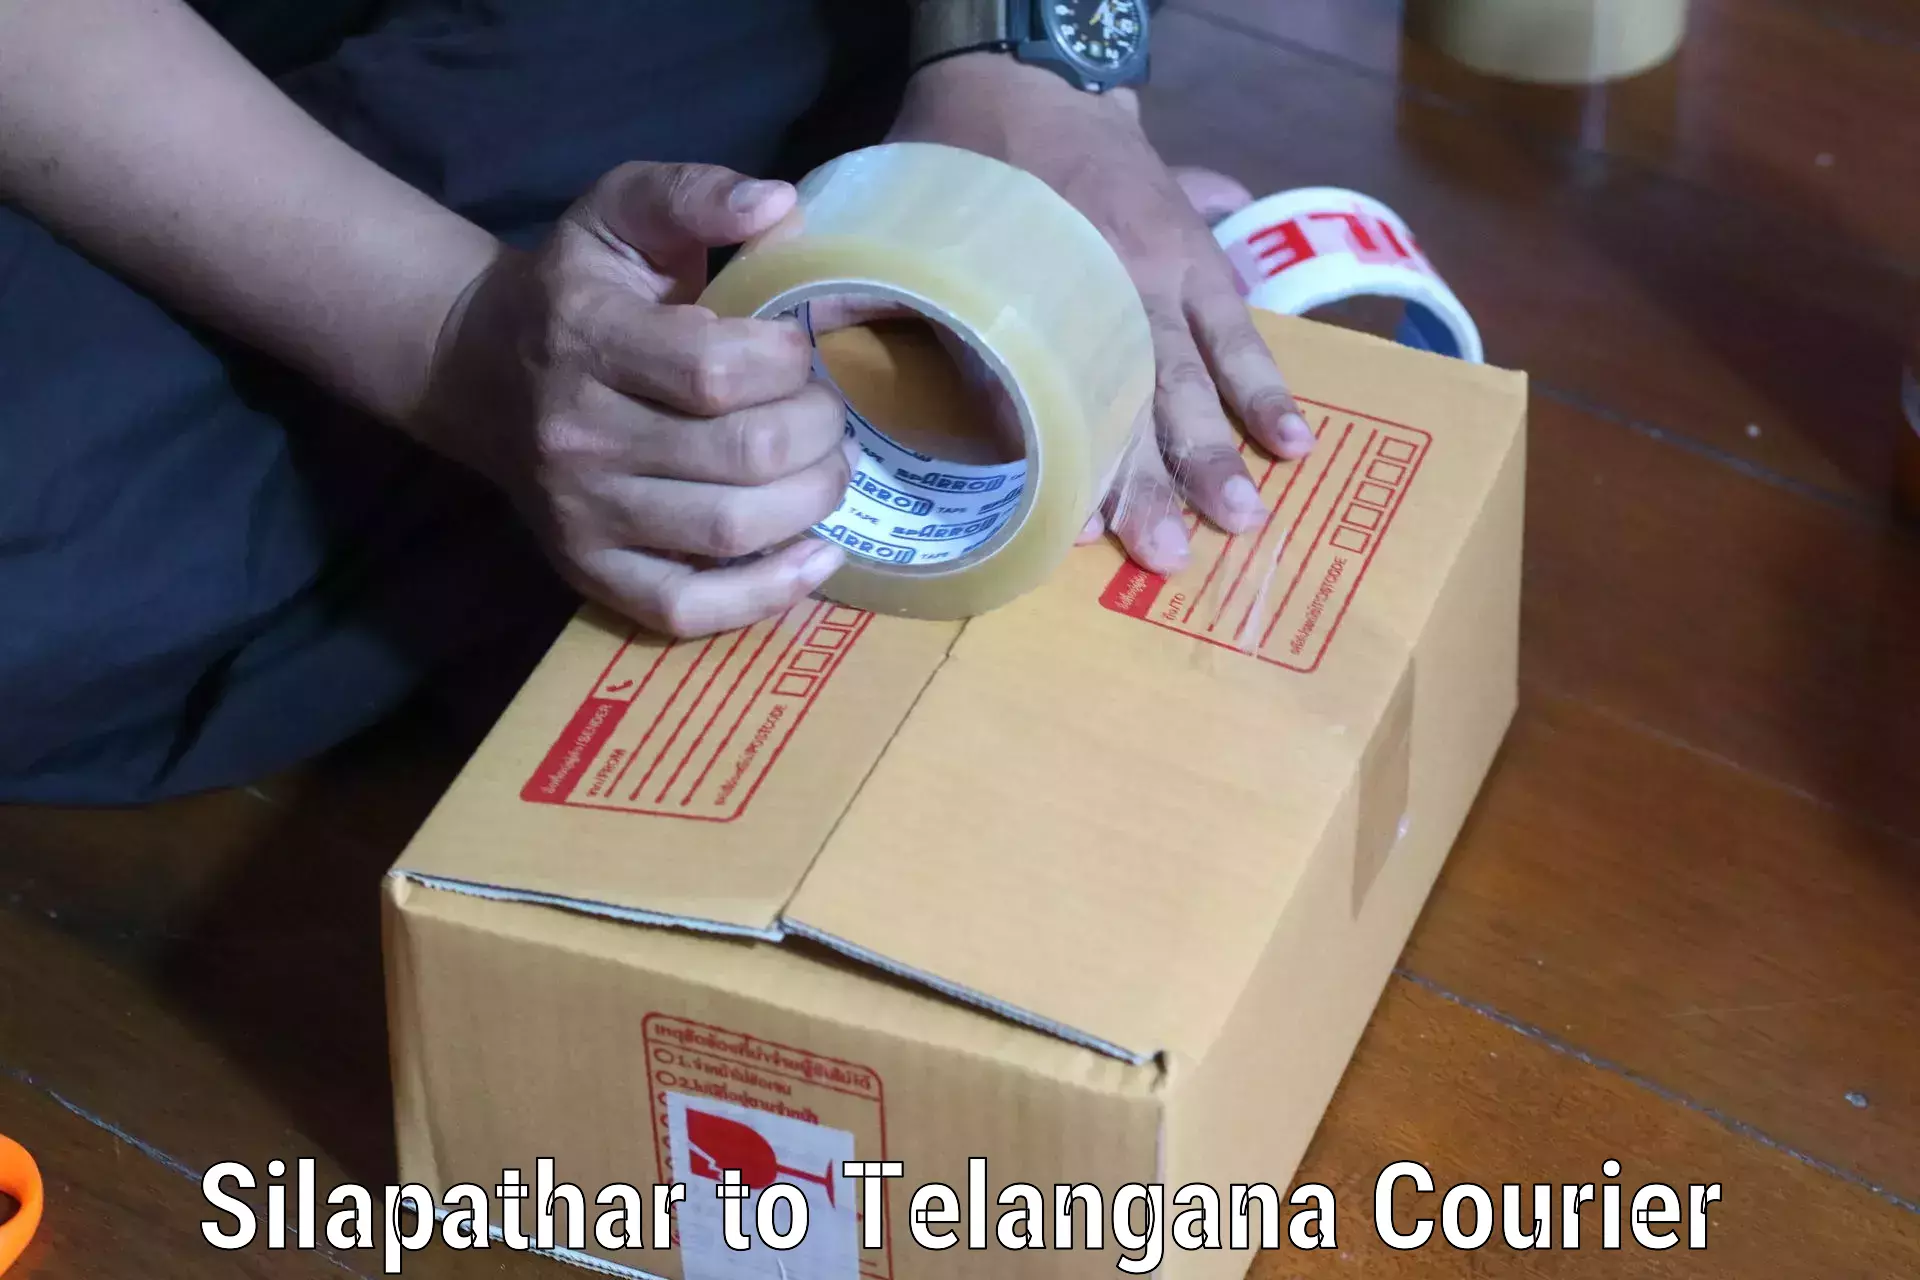 International courier networks Silapathar to Yellareddipet